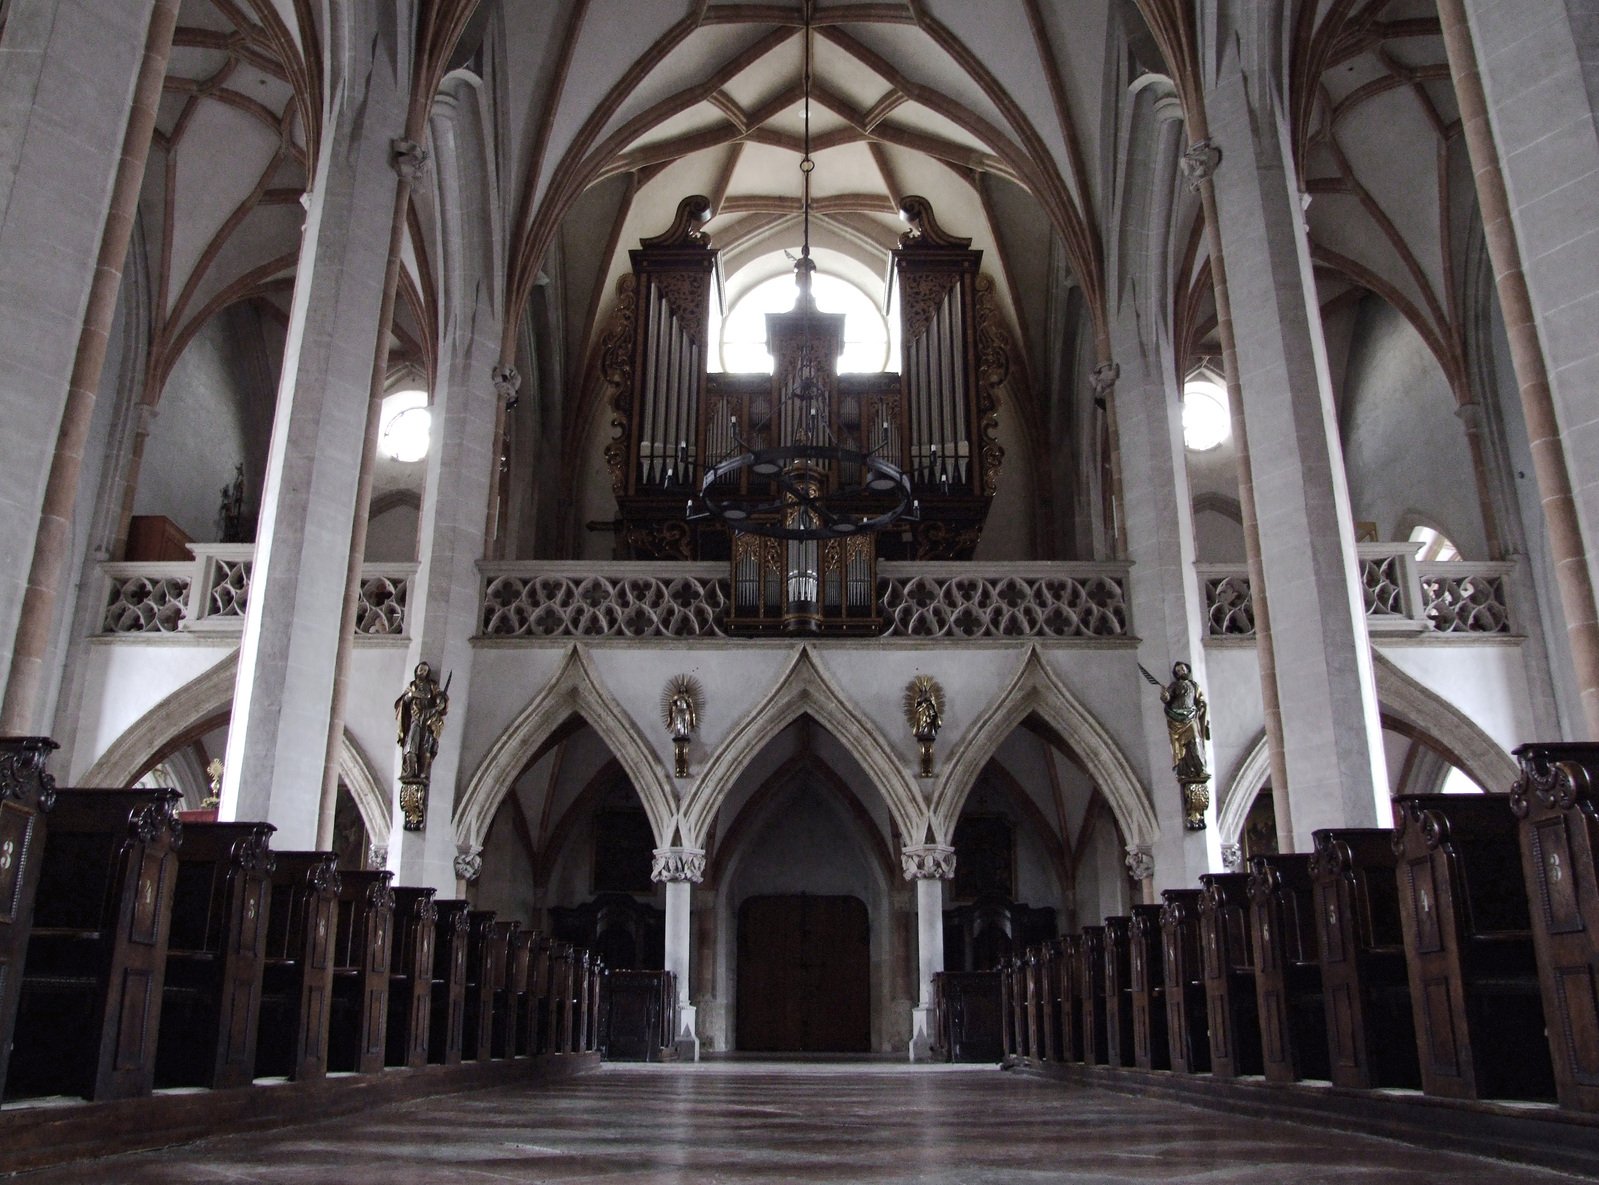 the inside of a church with high ceilings and wood